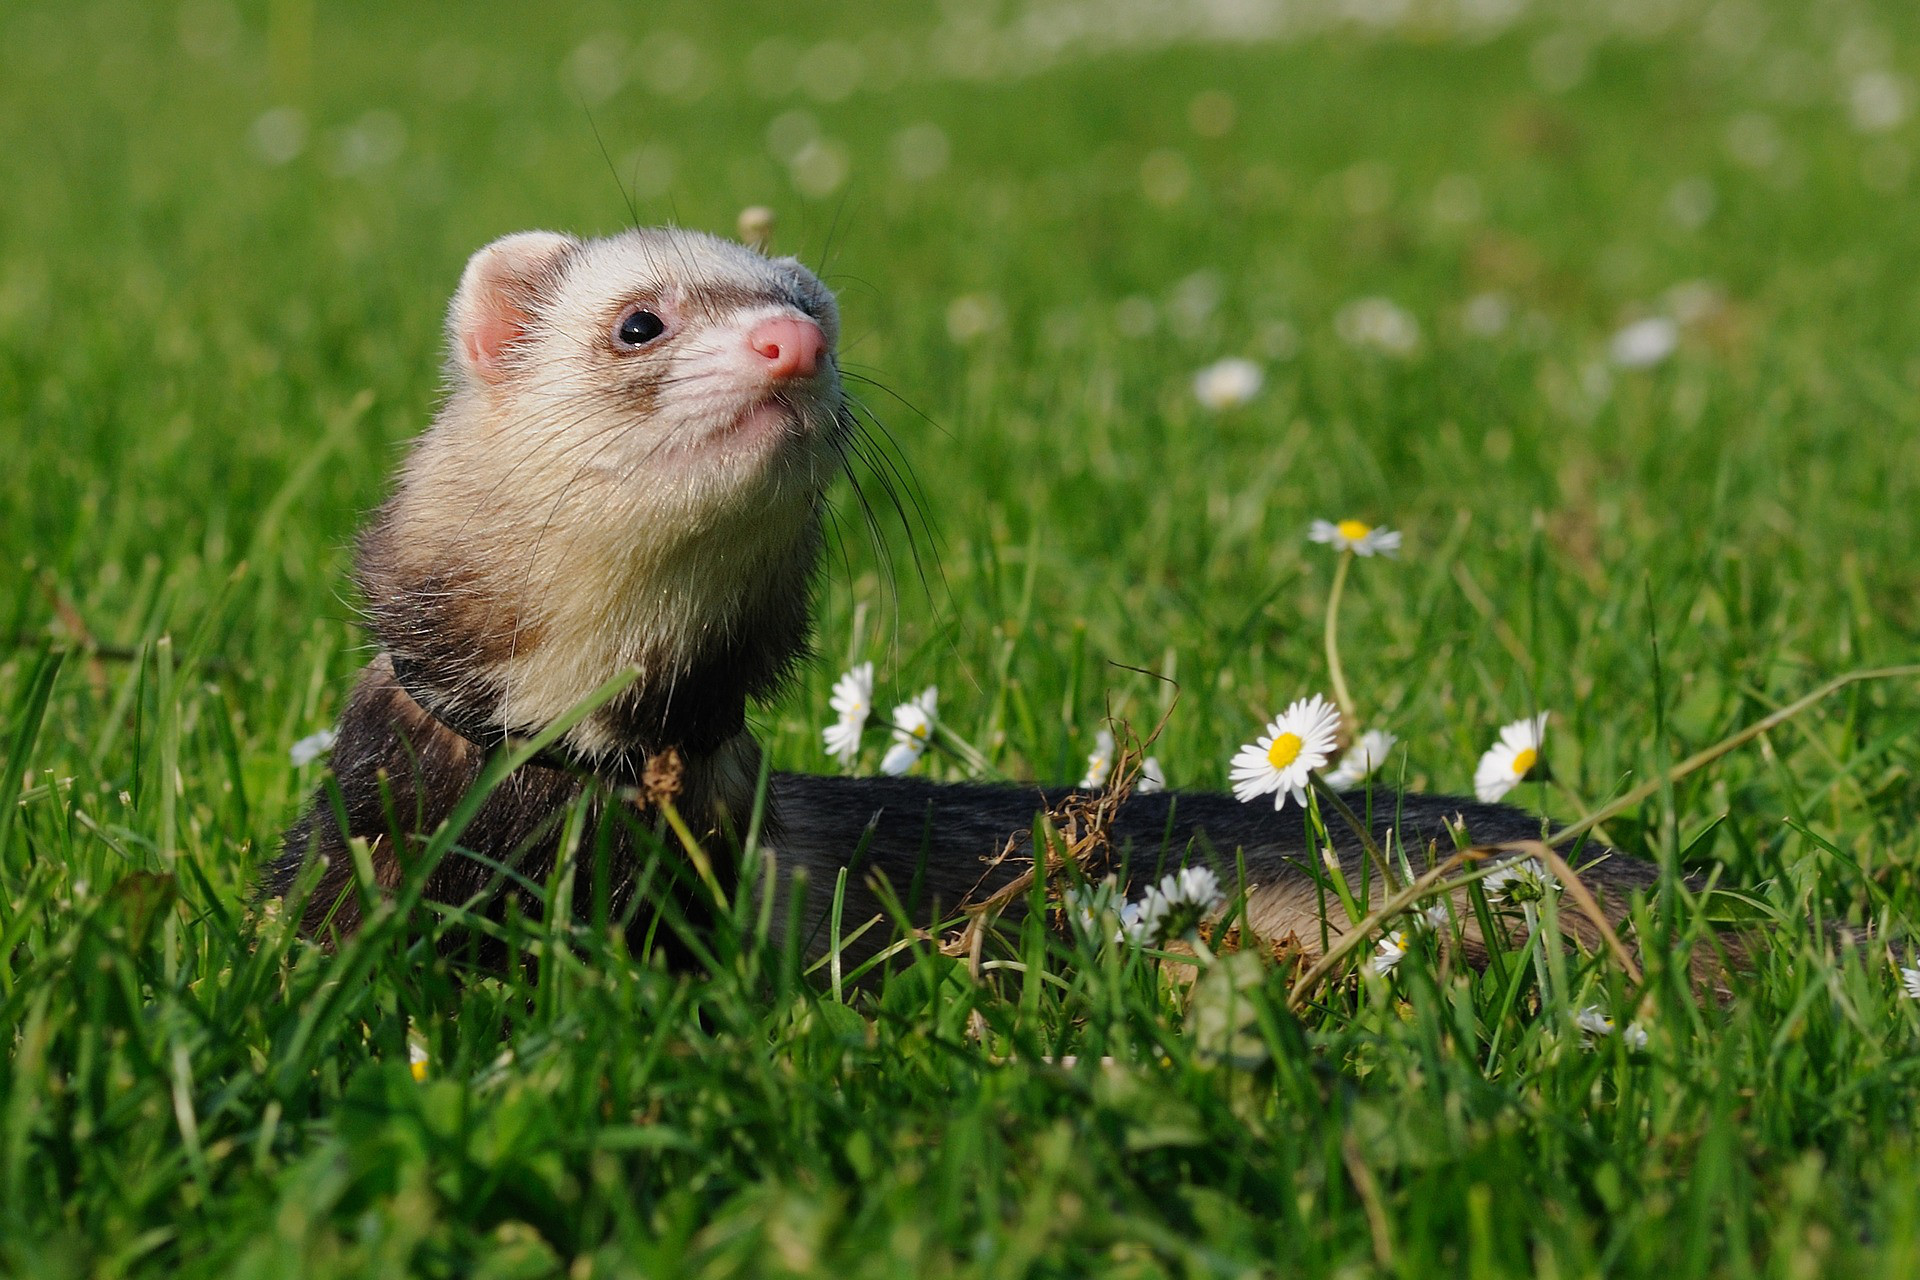 Caring for your working ferret